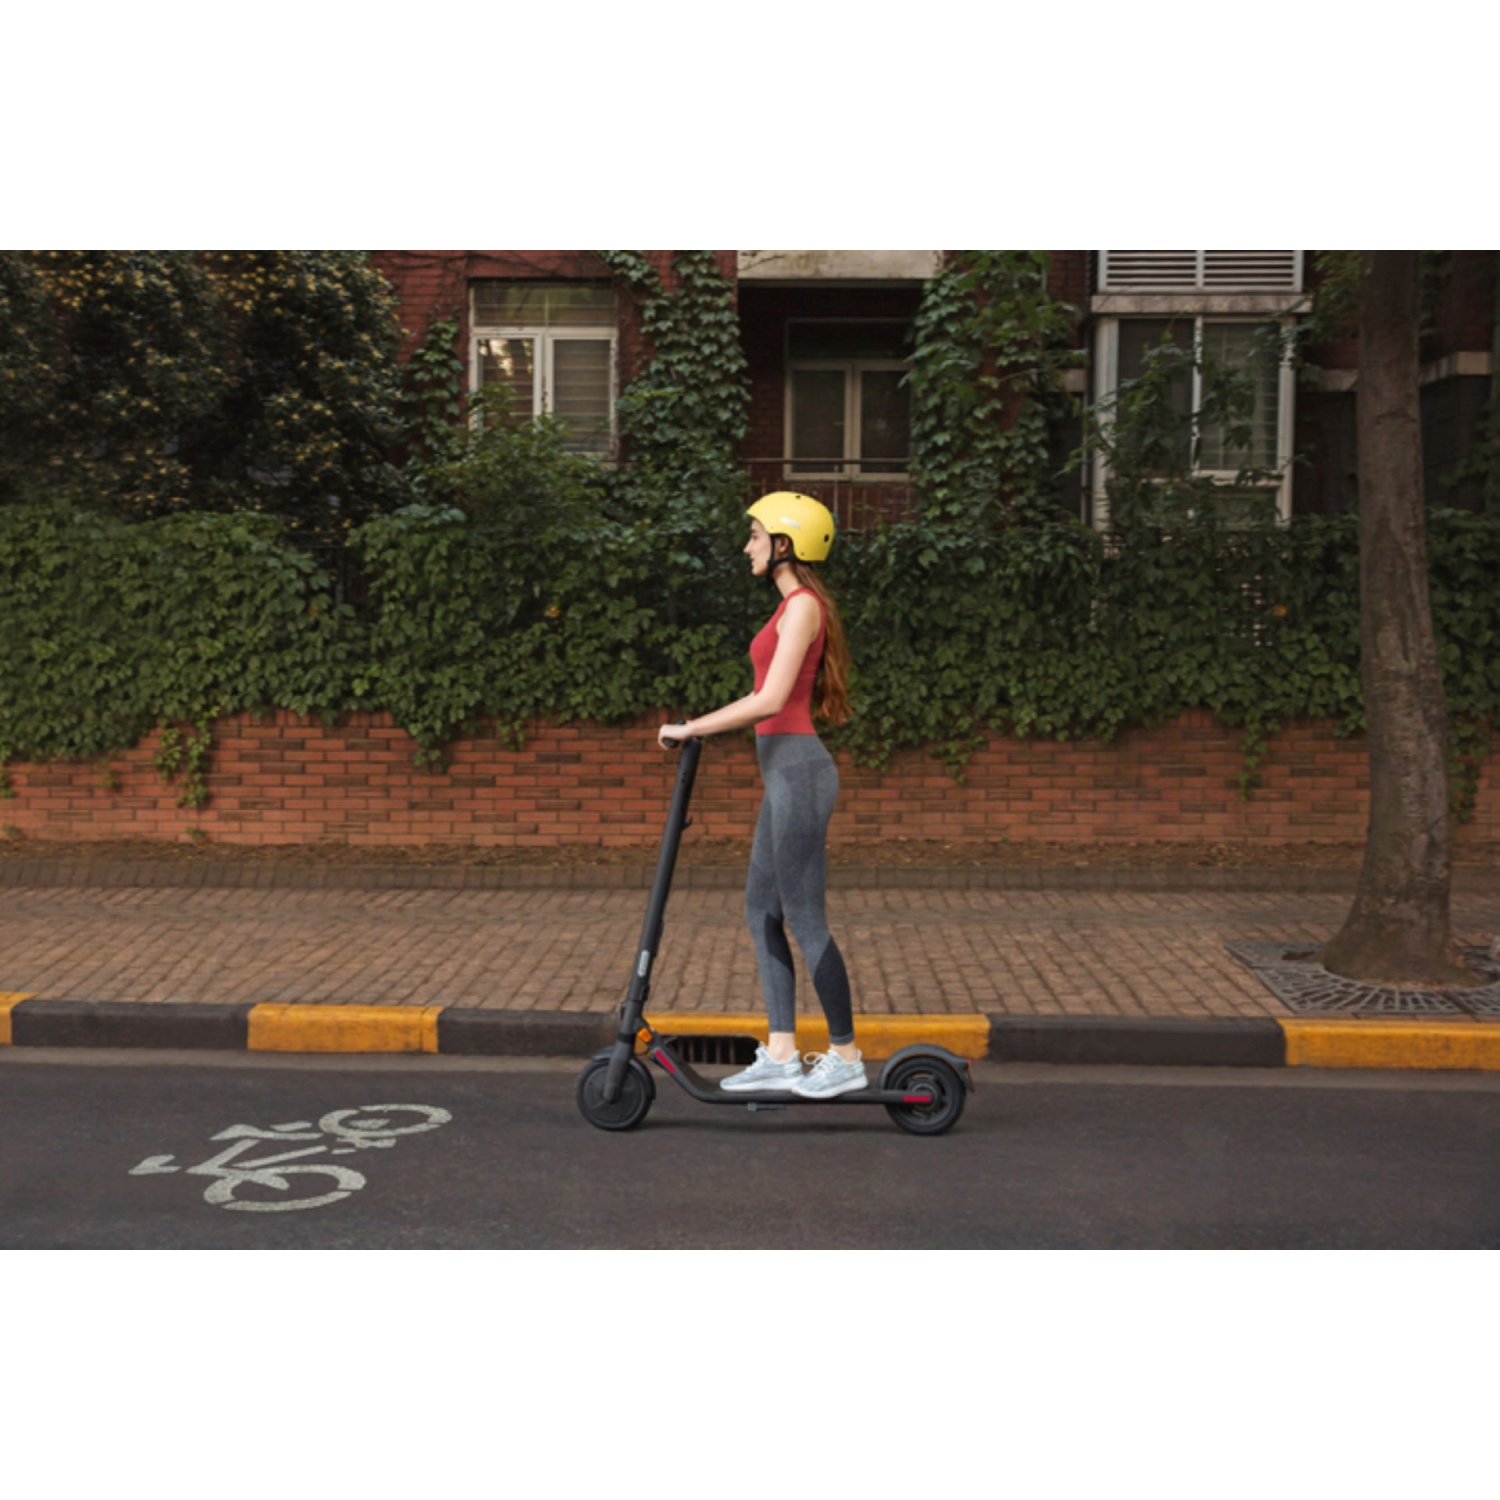 Segway Ninebot E25E Electric Scooter with Additional Battery - 2